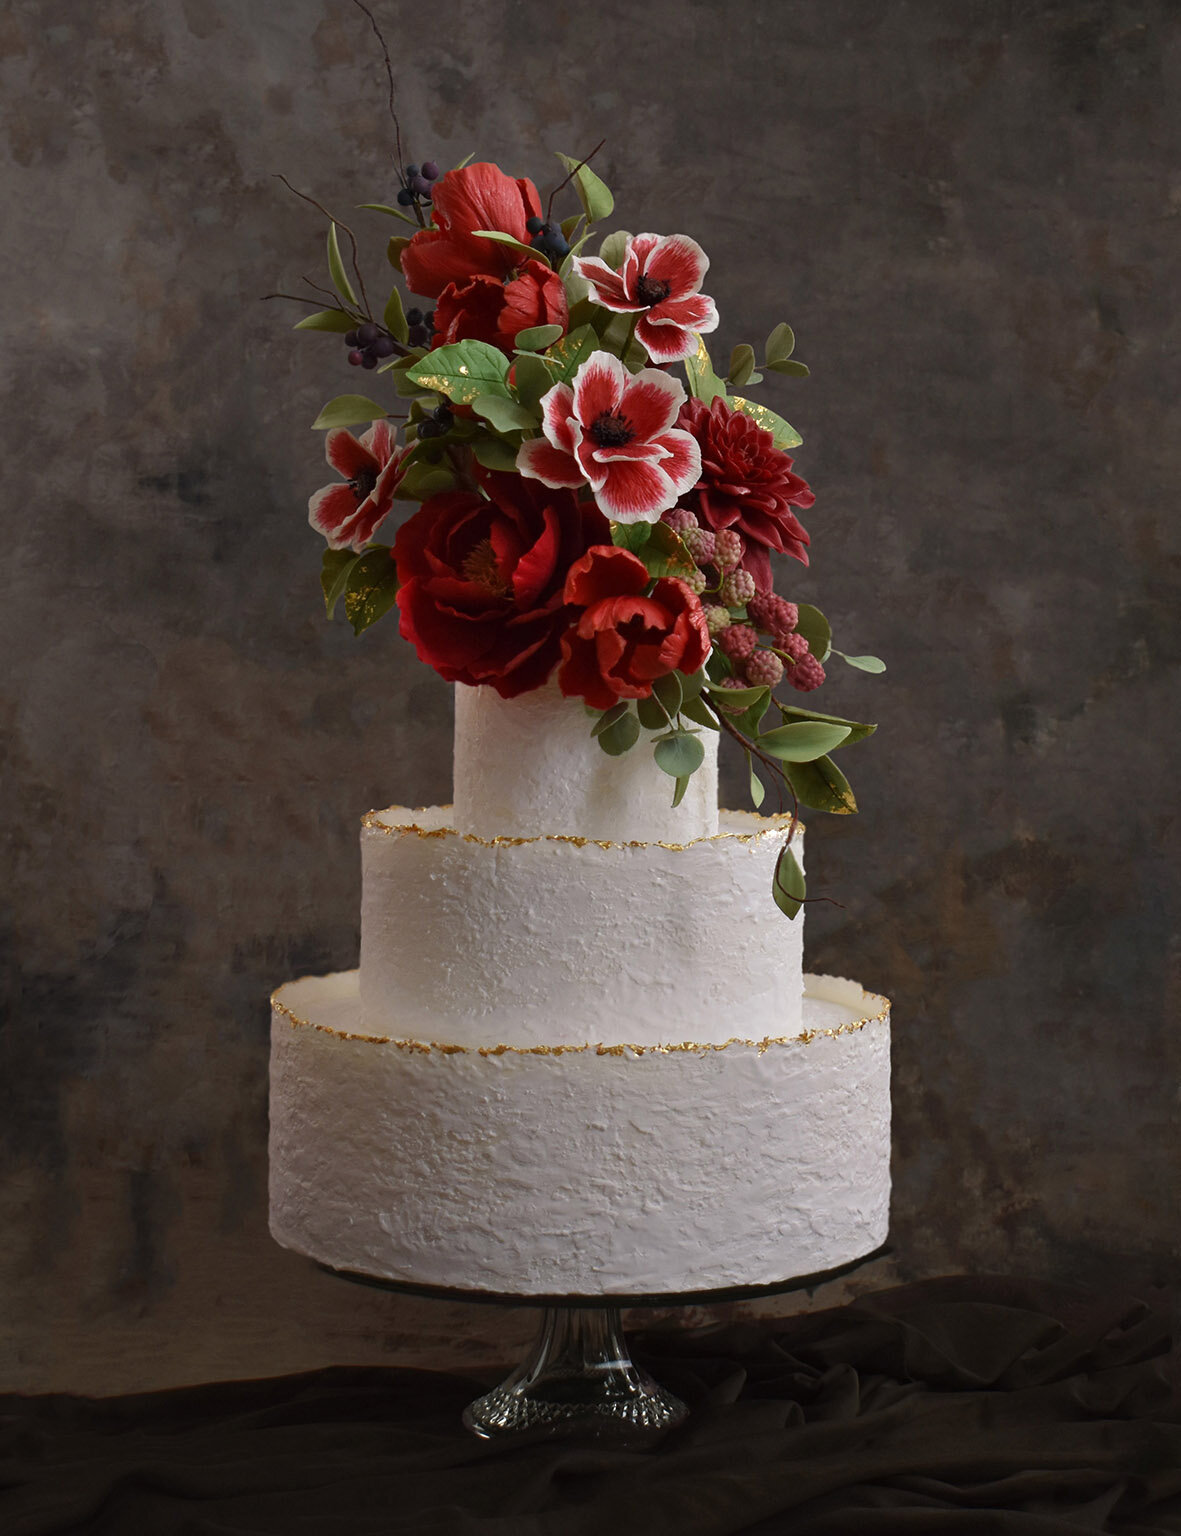 Three tiered white wedding cake with subtle texture, gold leaf detail and a dramatic display of deep red sugar flowers